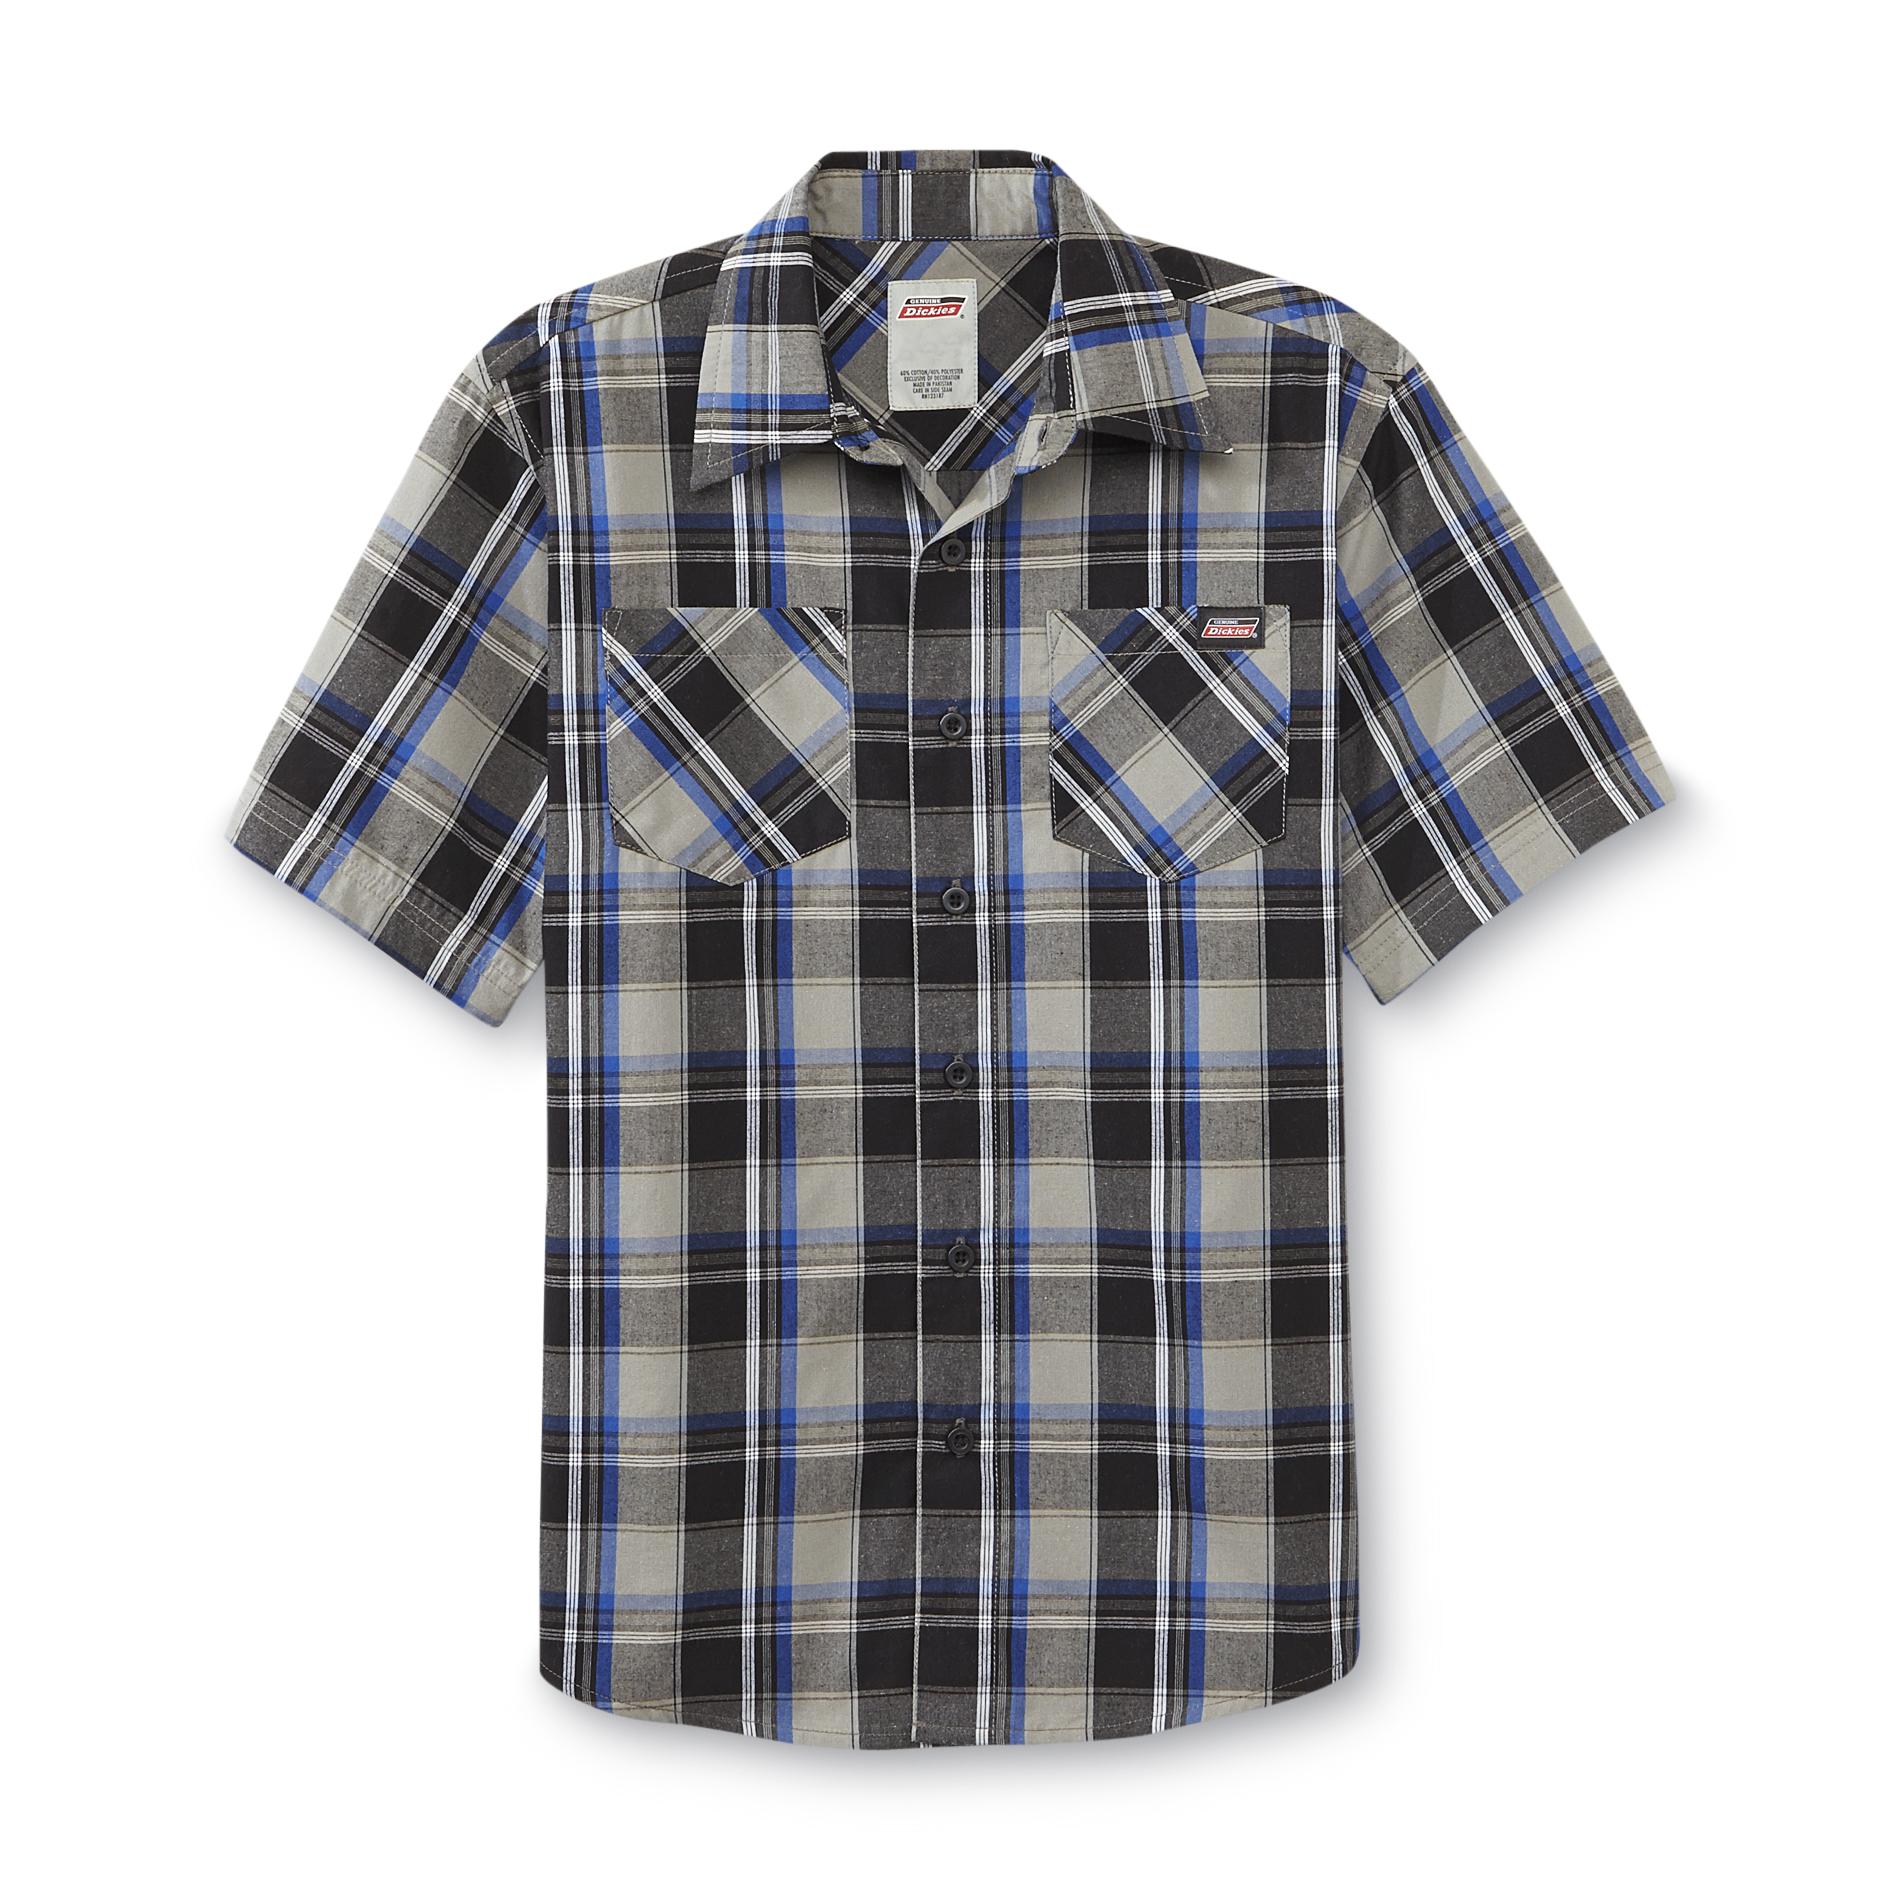 Genuine Dickies Boy's Button-Front Shirt - Plaid